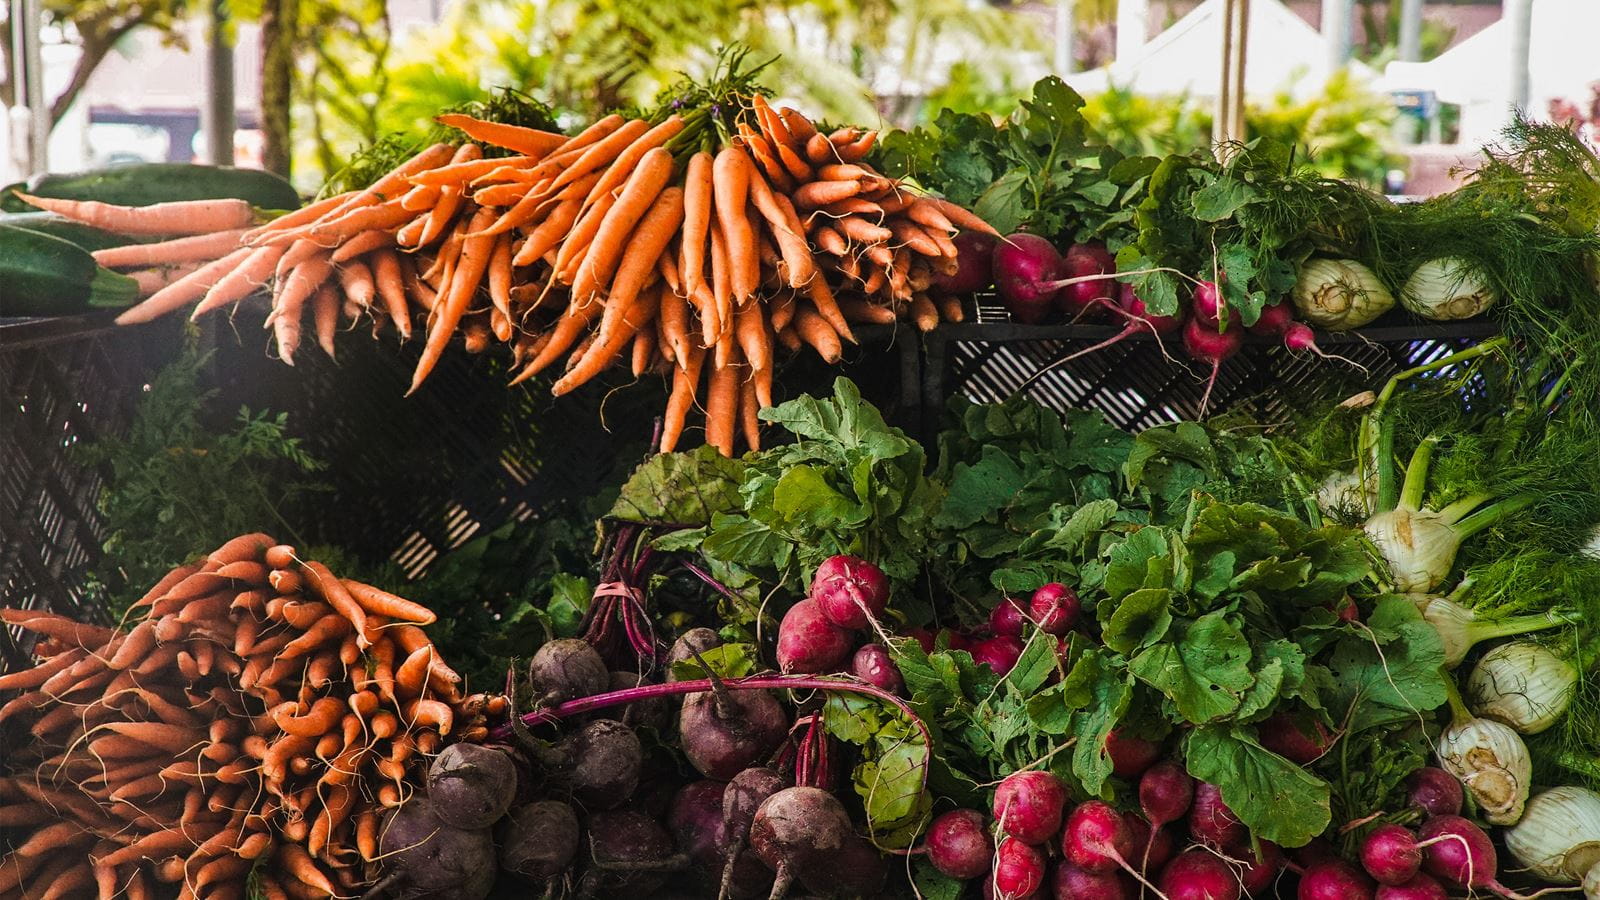 Radish And Carrots (Wendy Wei / Pexels)